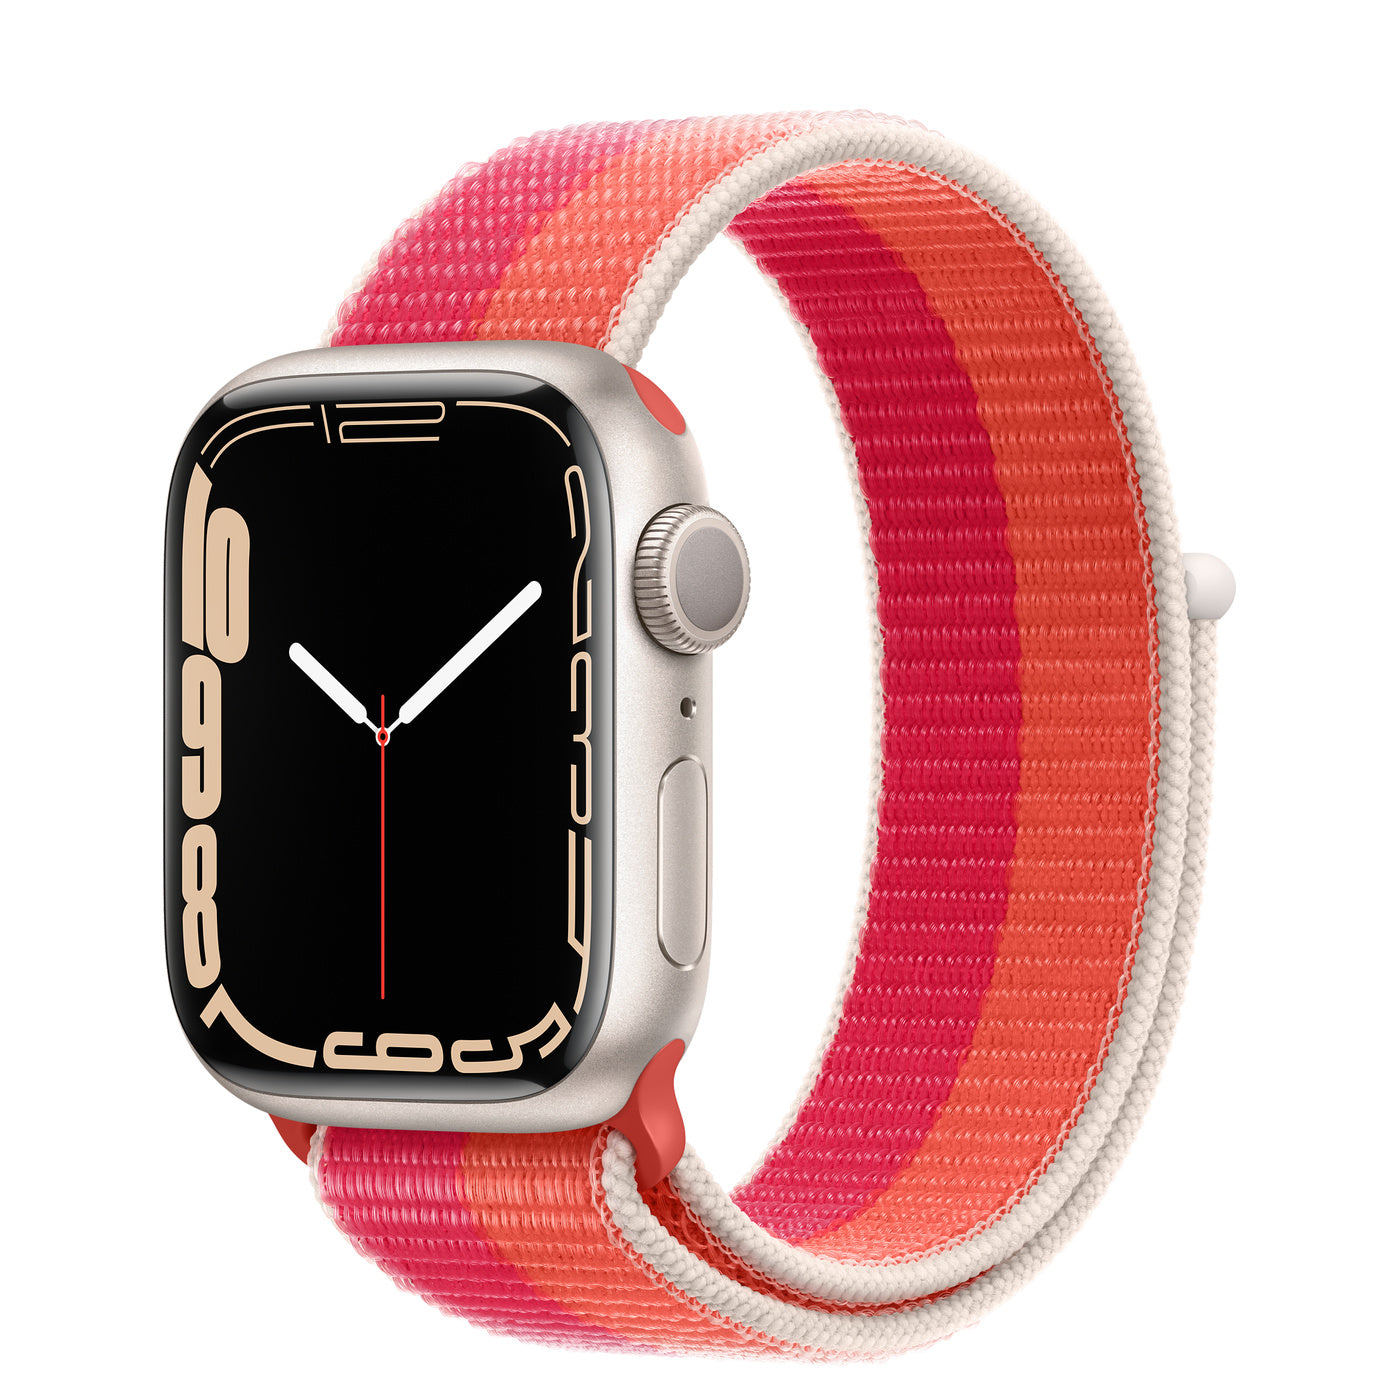 Nectarine/Peony Sports Loop for iWatch 38mm, 40mm & 41mm Series 1 2 3 4 5 6 7 8(Watch Not Included)